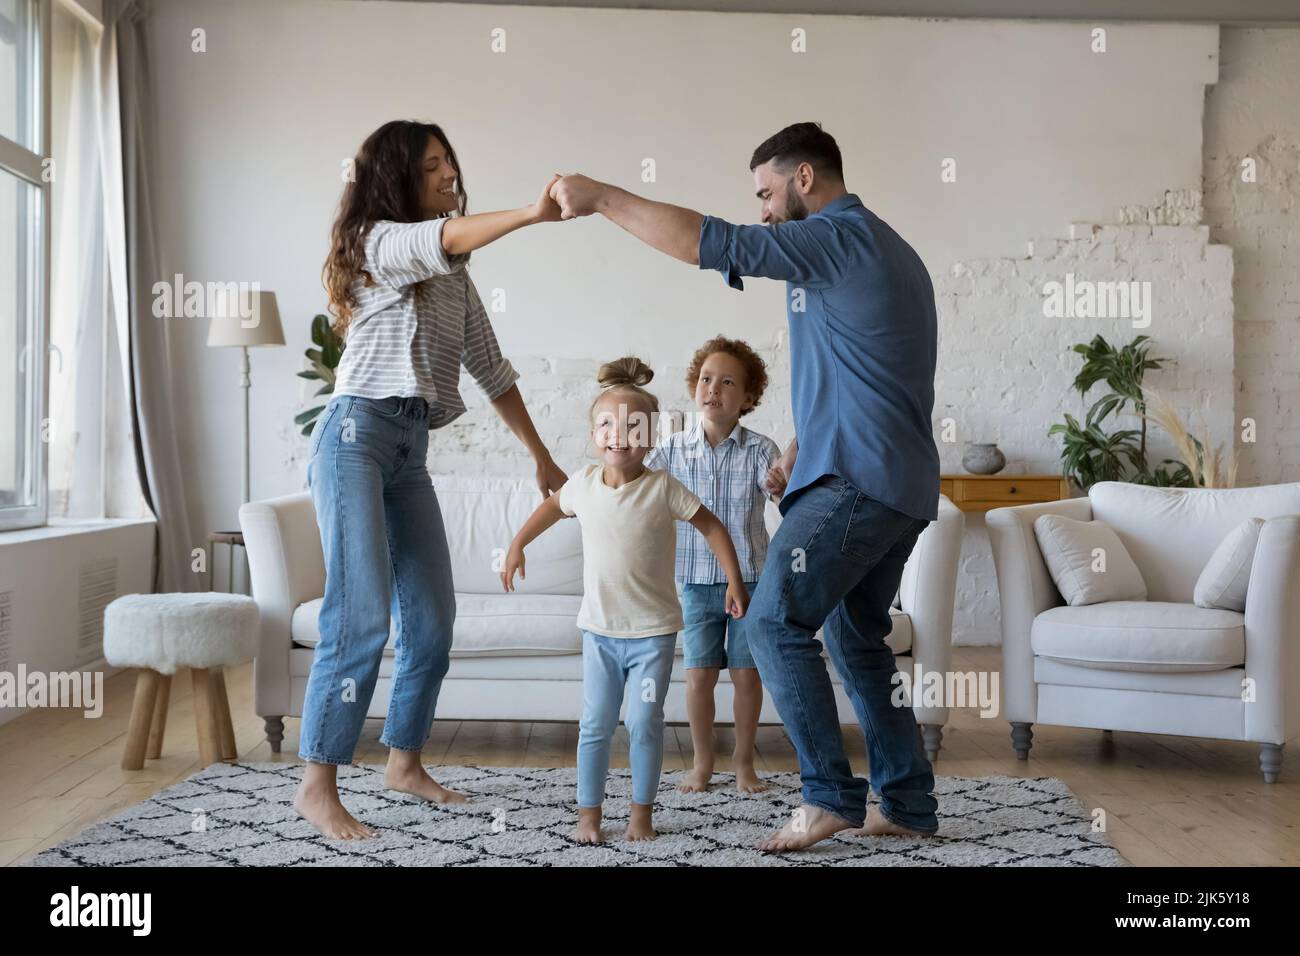 Happy active young parents and little kids playing active games Stock Photo